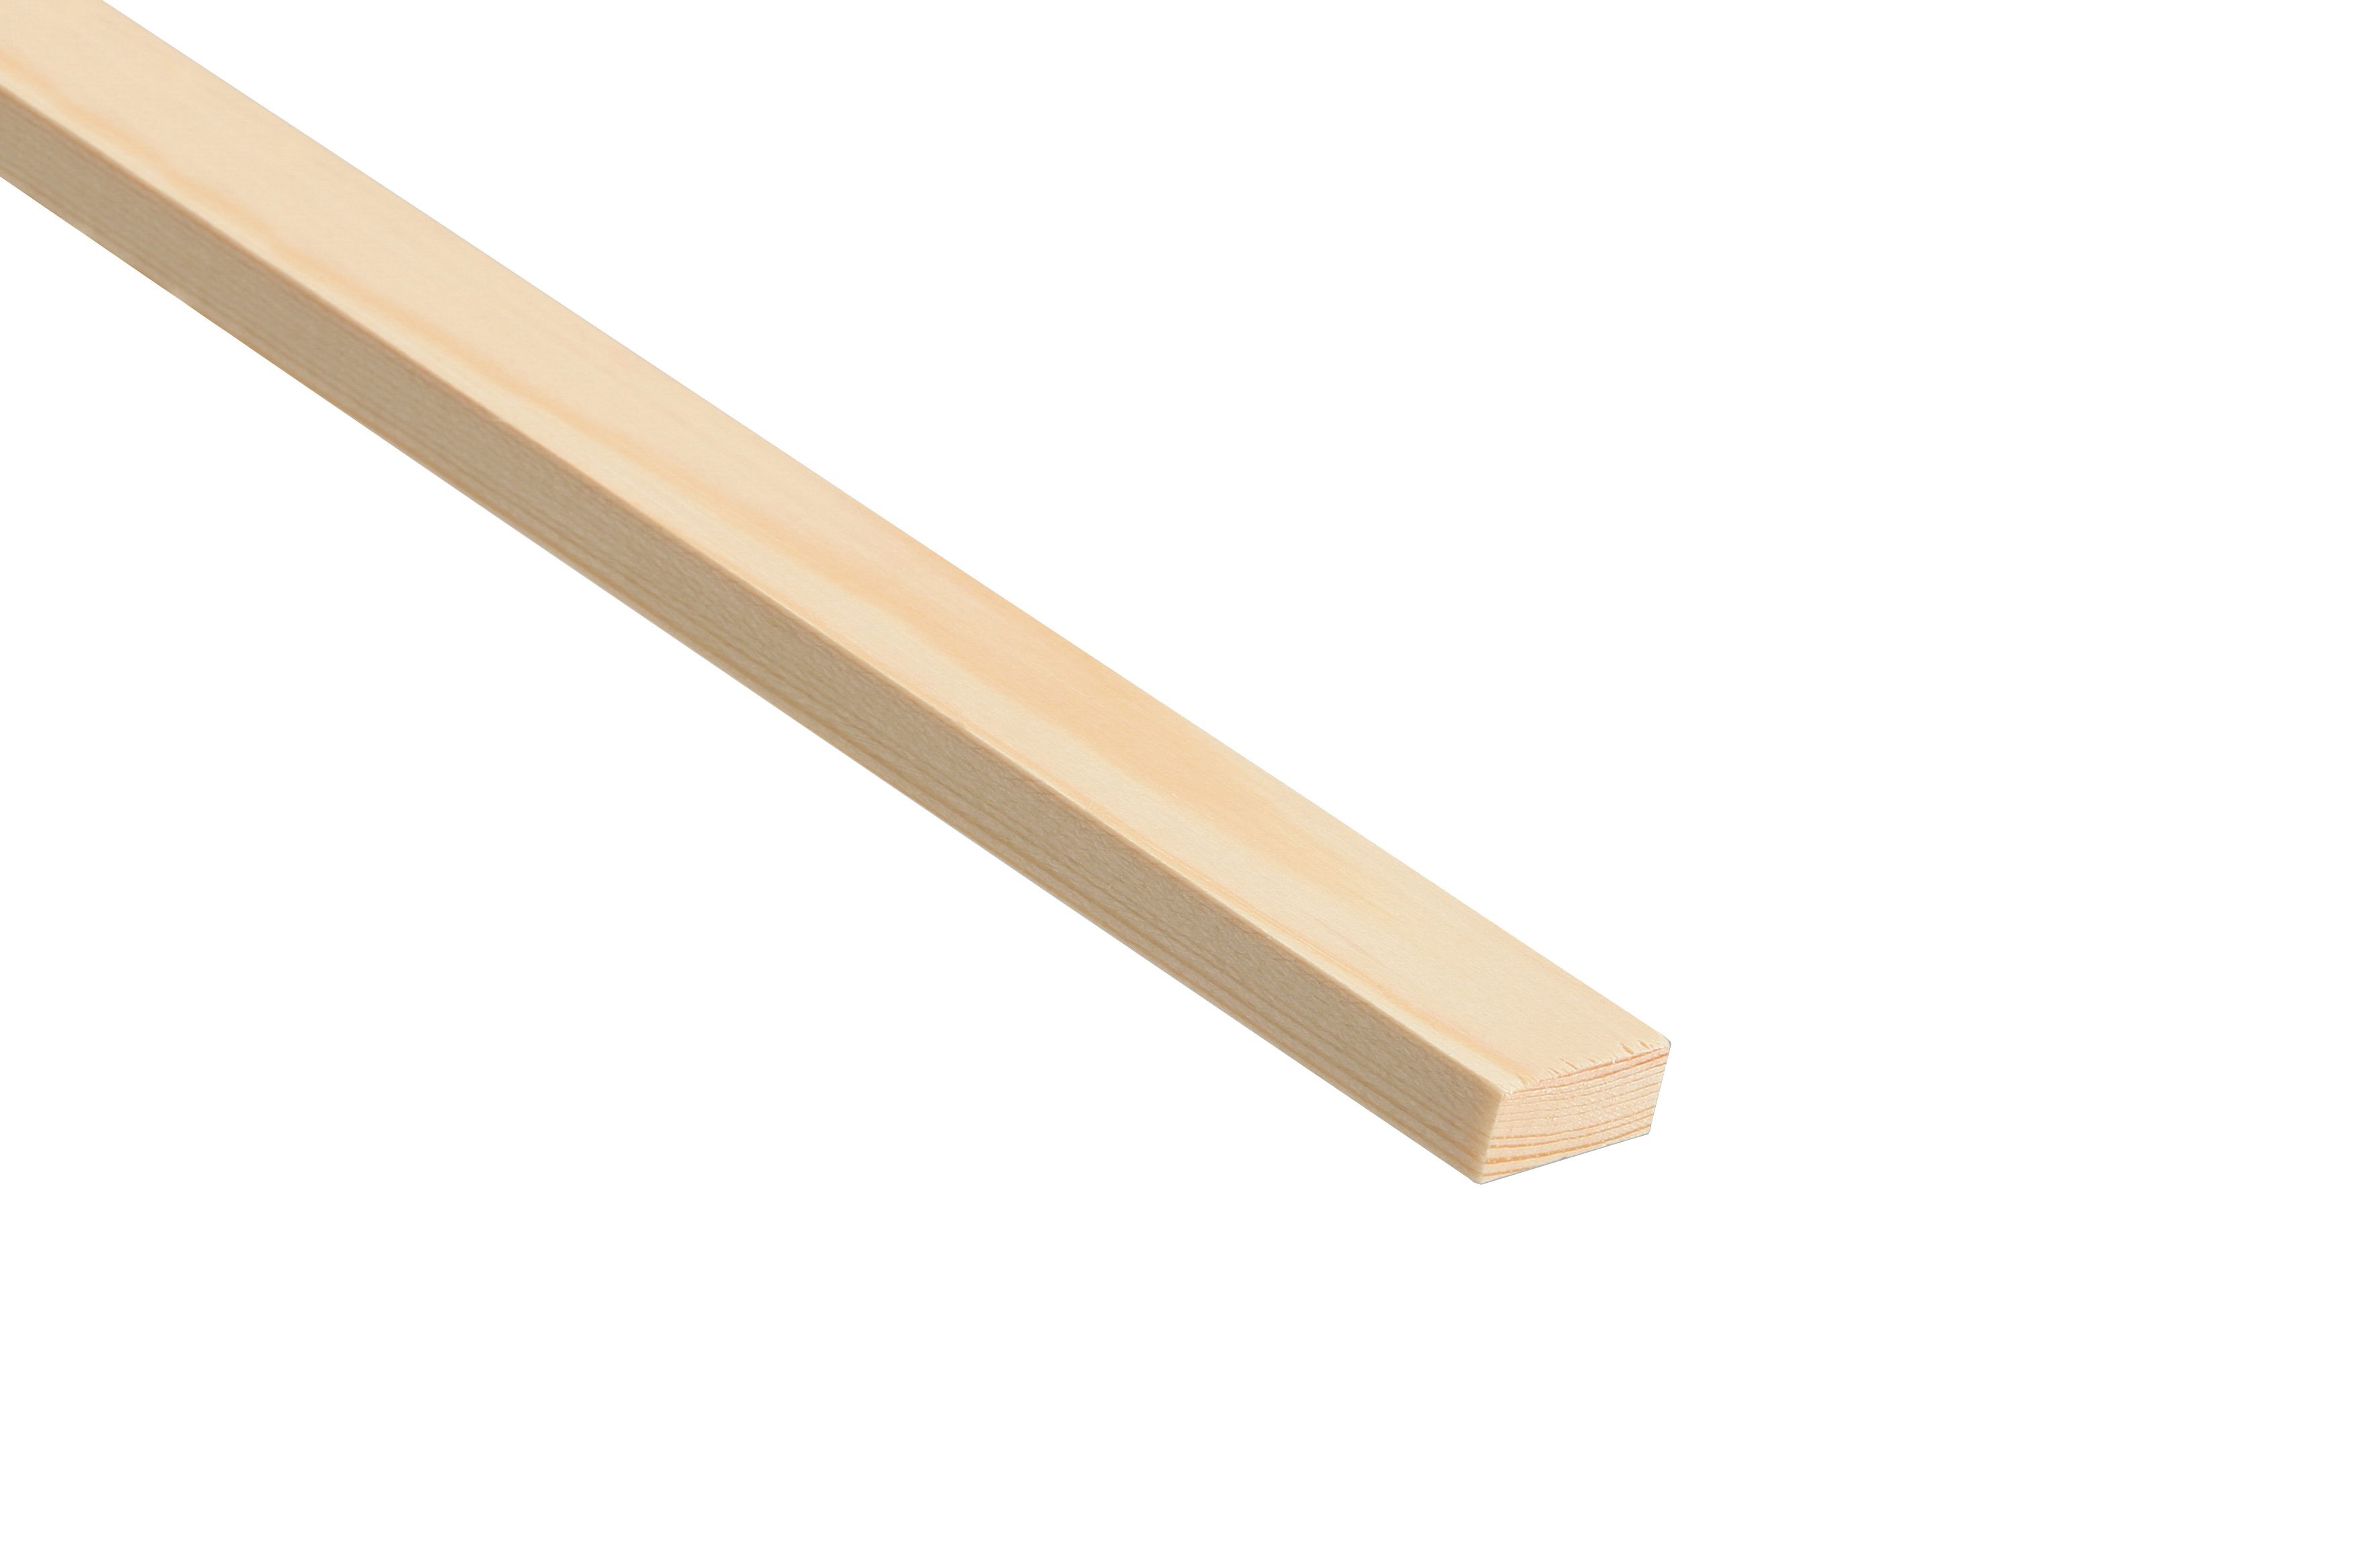 Image of Wickes Pine Stripwood Moulding (PSE) - 18 x 4 x 2400mm